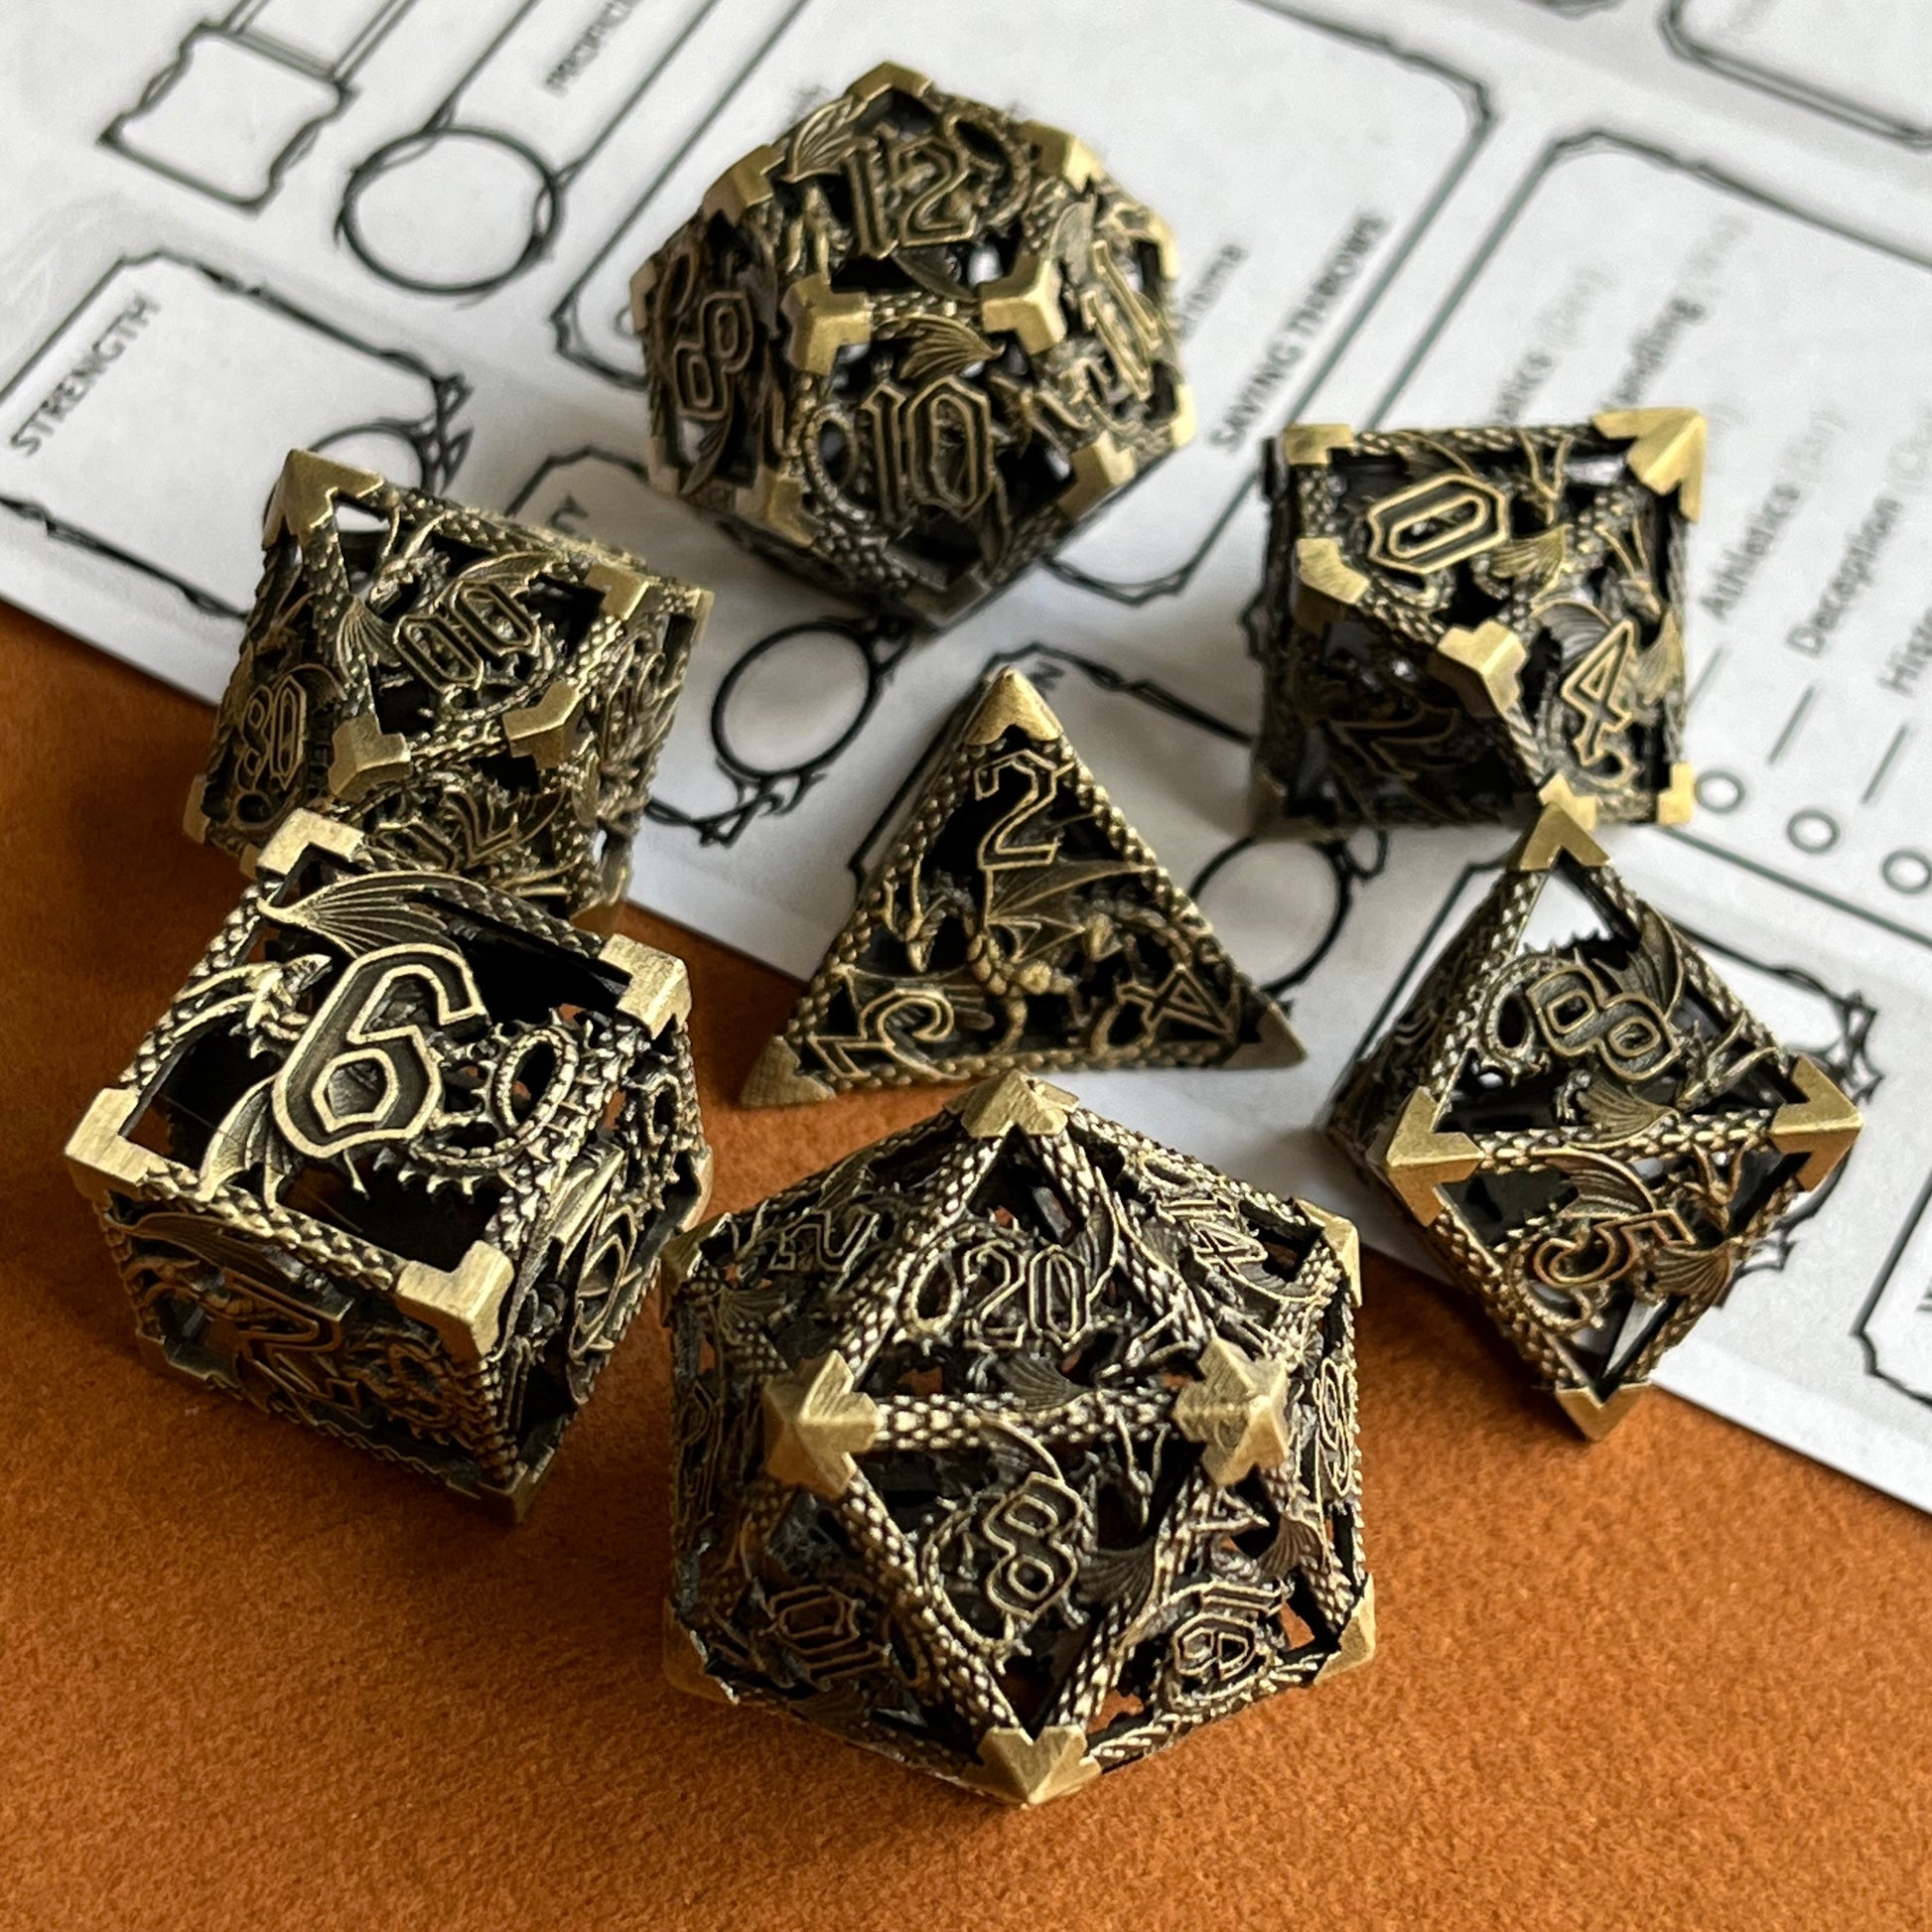 Bronze dragon hollow dnd dice set, metal dice set, TTRPG, role playing, role playing games